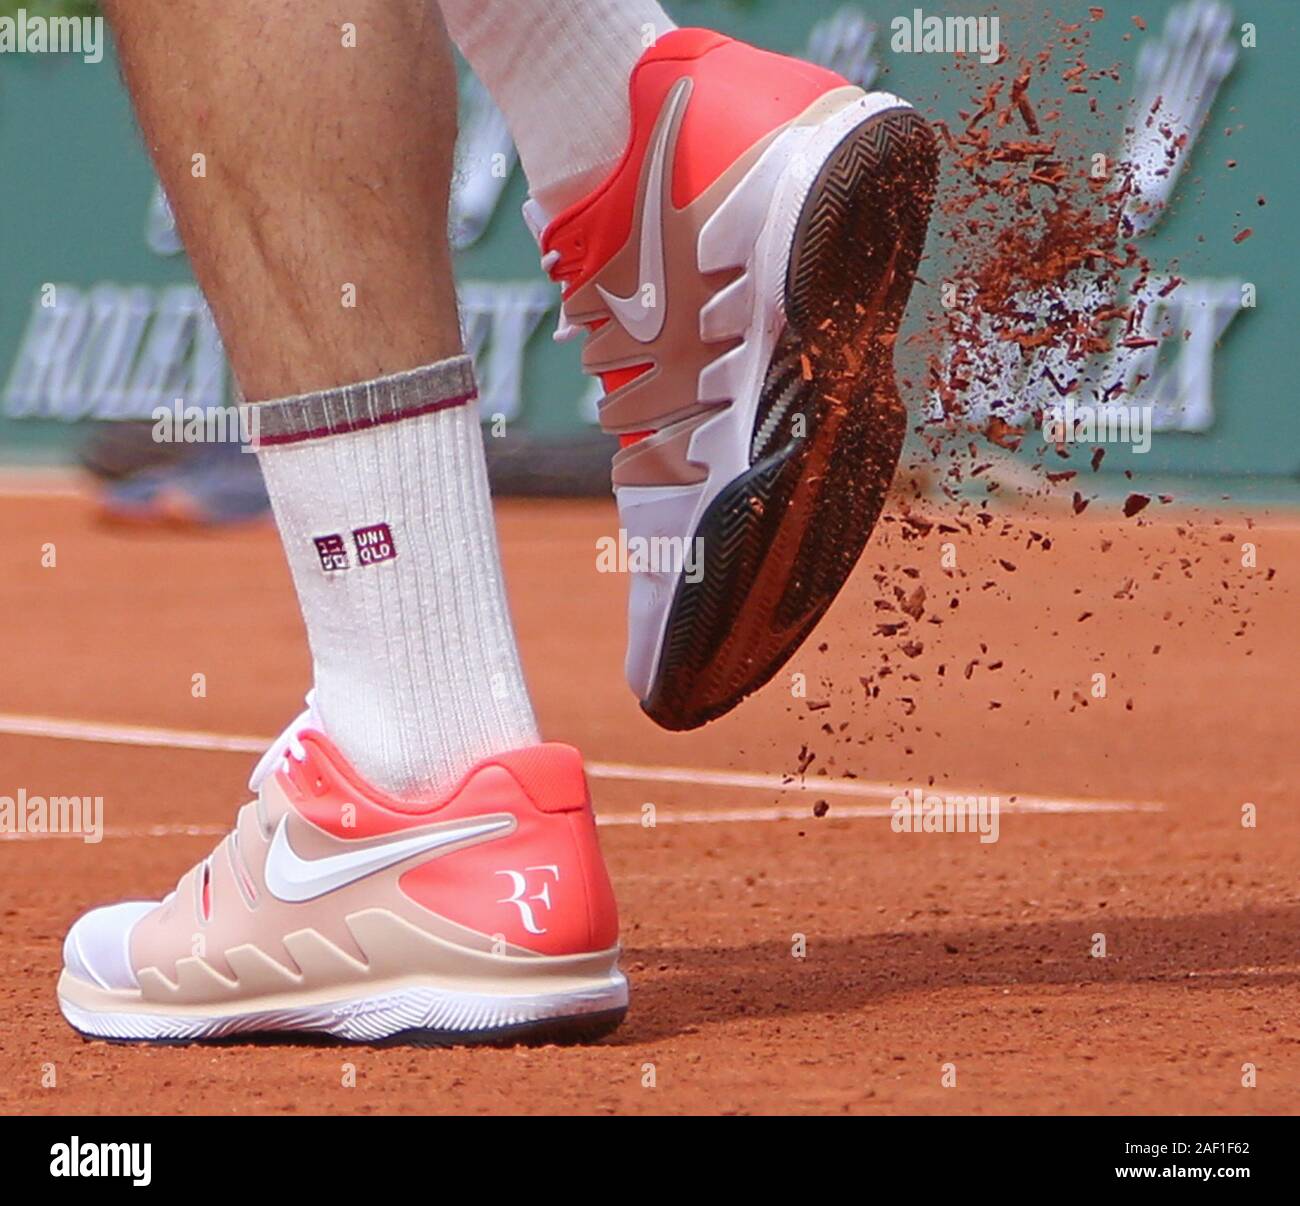 Paris, France. 12th Dec, 2019. Roger Federer of Switzerland hits a shot during his French Open men's second-round match against Oscar Otte of Germany at Roland Garros in Paris on May 29, 2019. Federer defeated Otte 6-4, 6-3, 6-4 to advance to the third round. Photo by David Silpa/UPI Credit: UPI/Alamy Live News Stock Photo